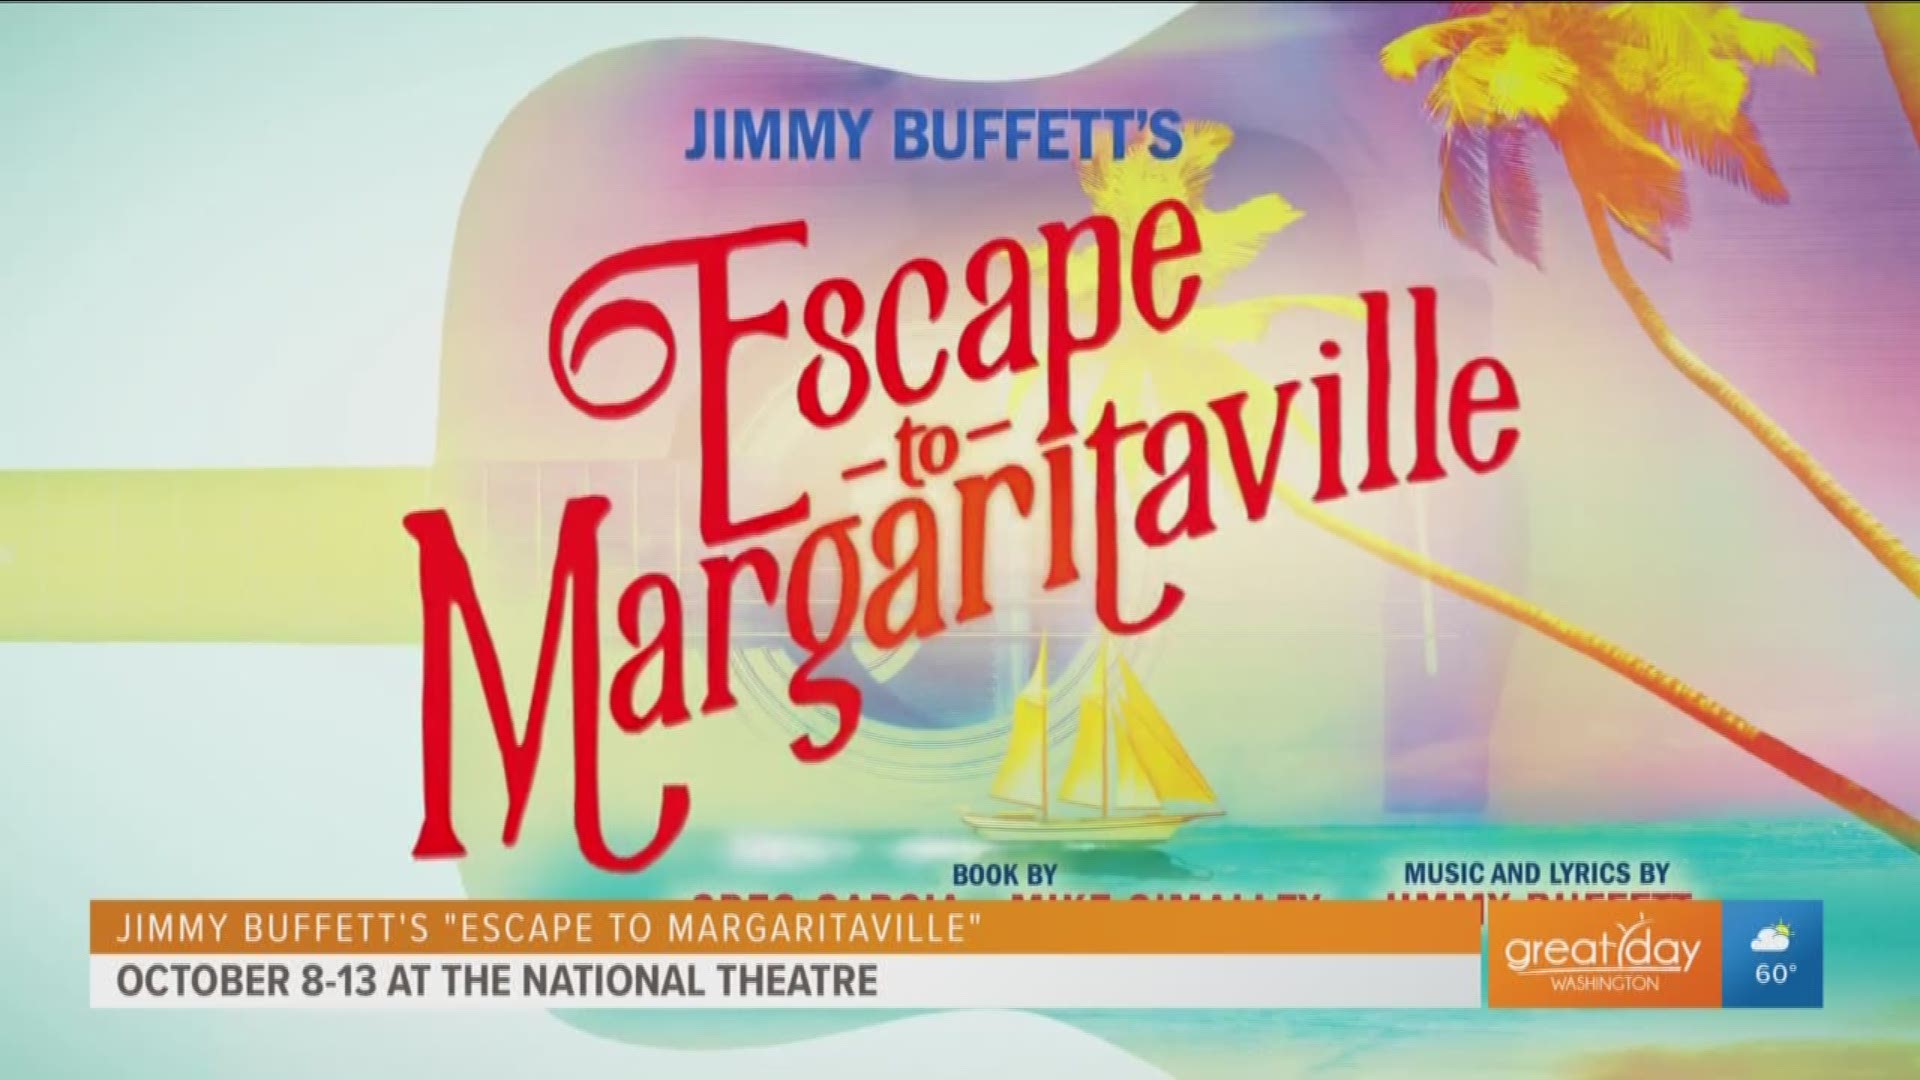 Legendary singer-songwriter Jimmy Buffett chats with Kristen about "Escape to Margaritaville" musical coming to DC Oct. 8-13 at the National Theatre.